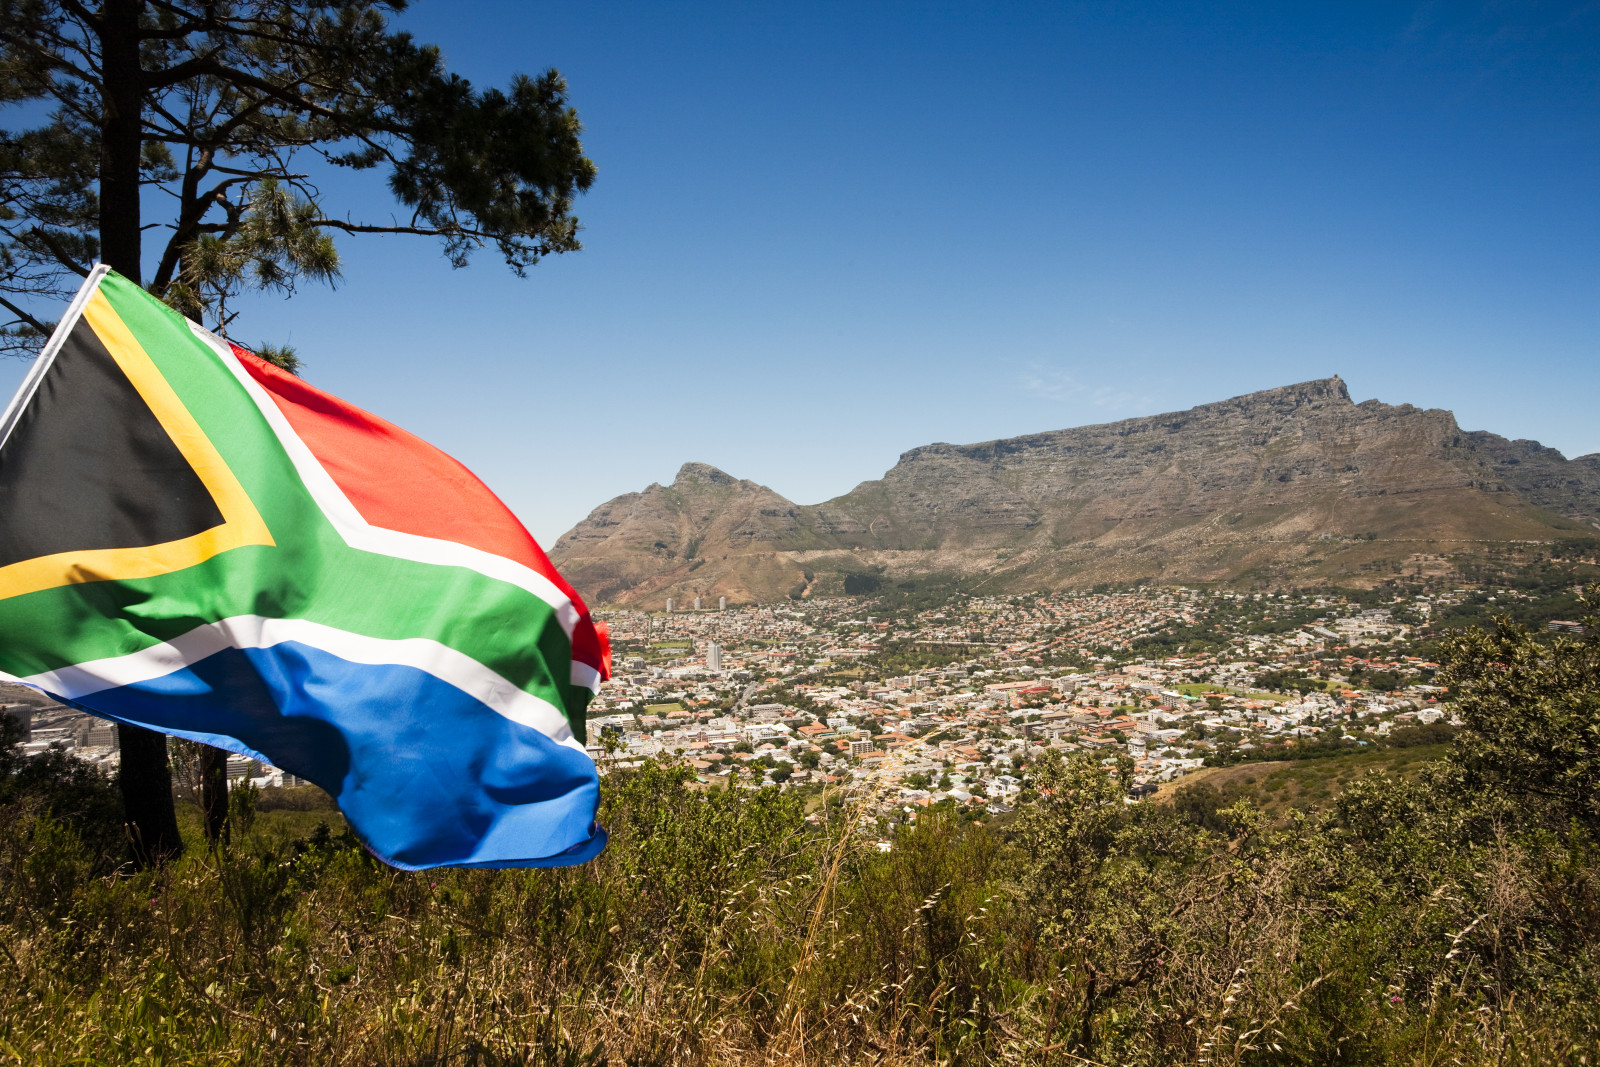 South Africa is not yet a free and equal state – The Mail & Guardian